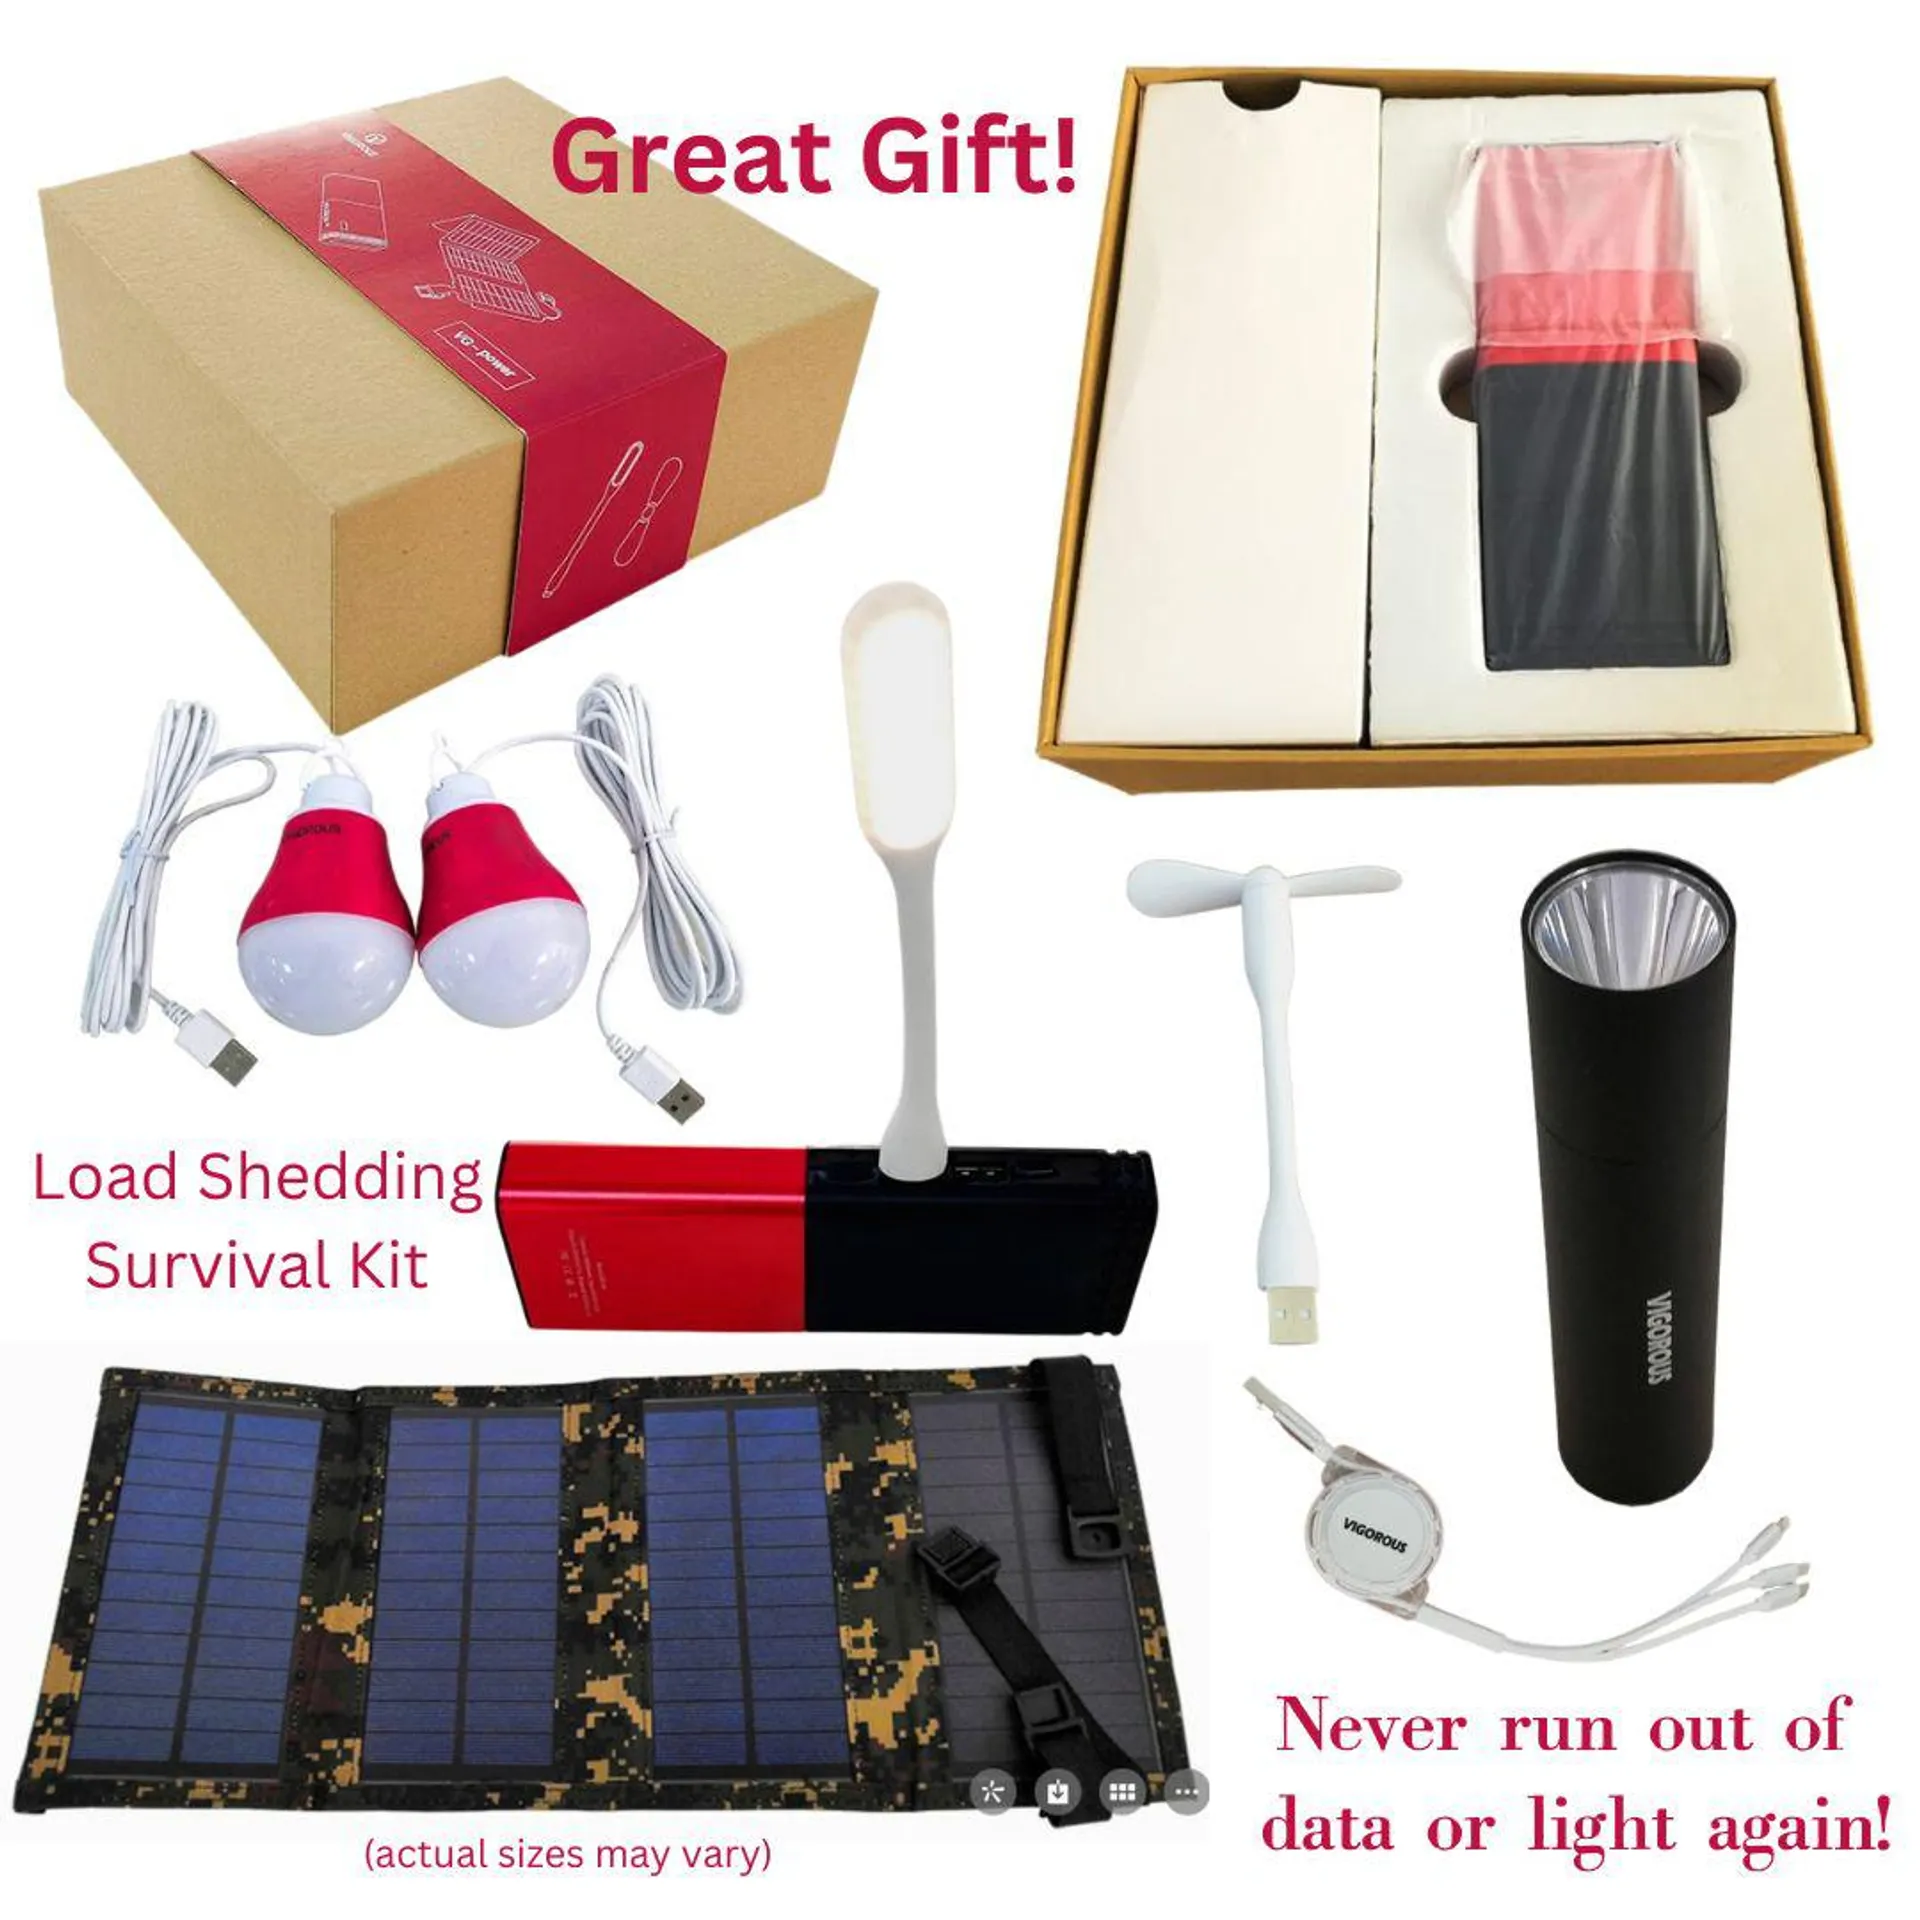 Lifespace VG Solar Power Kit with Solar Panel, Power Banks & Accessories - Gold